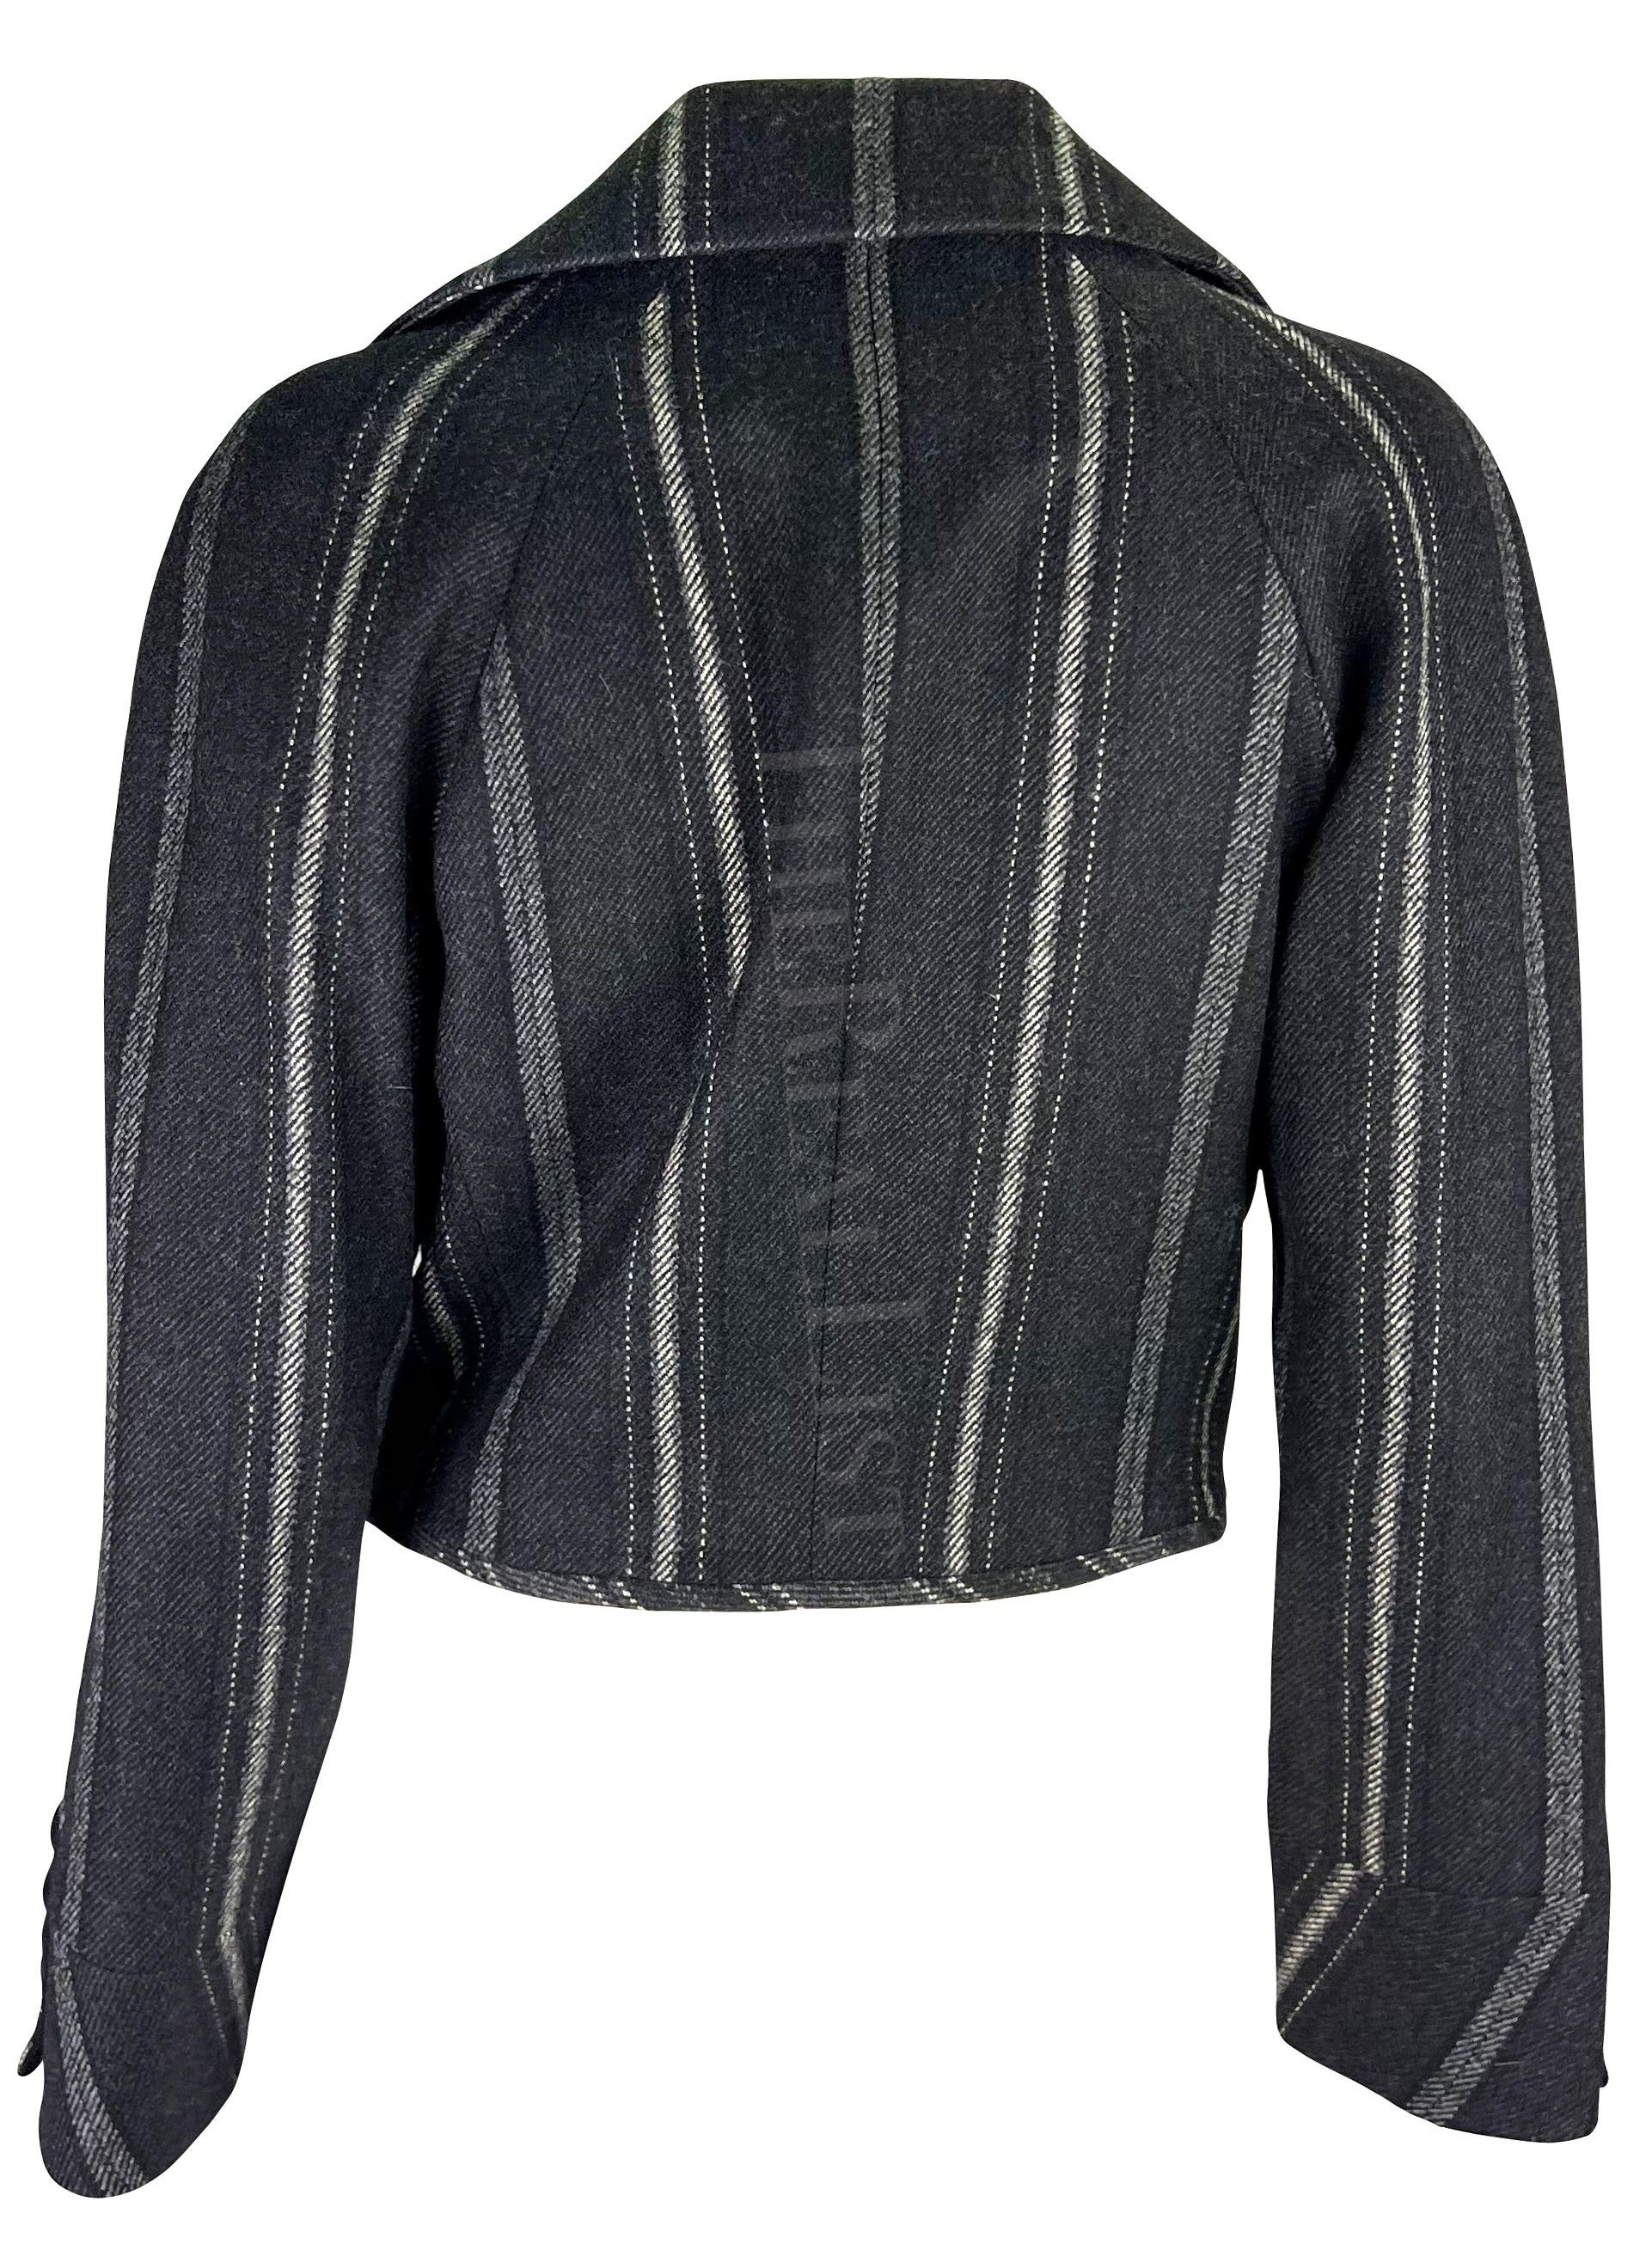 F/W 1993 Gianni Versace Black Grey Striped Cropped Runway Jacket For Sale 2